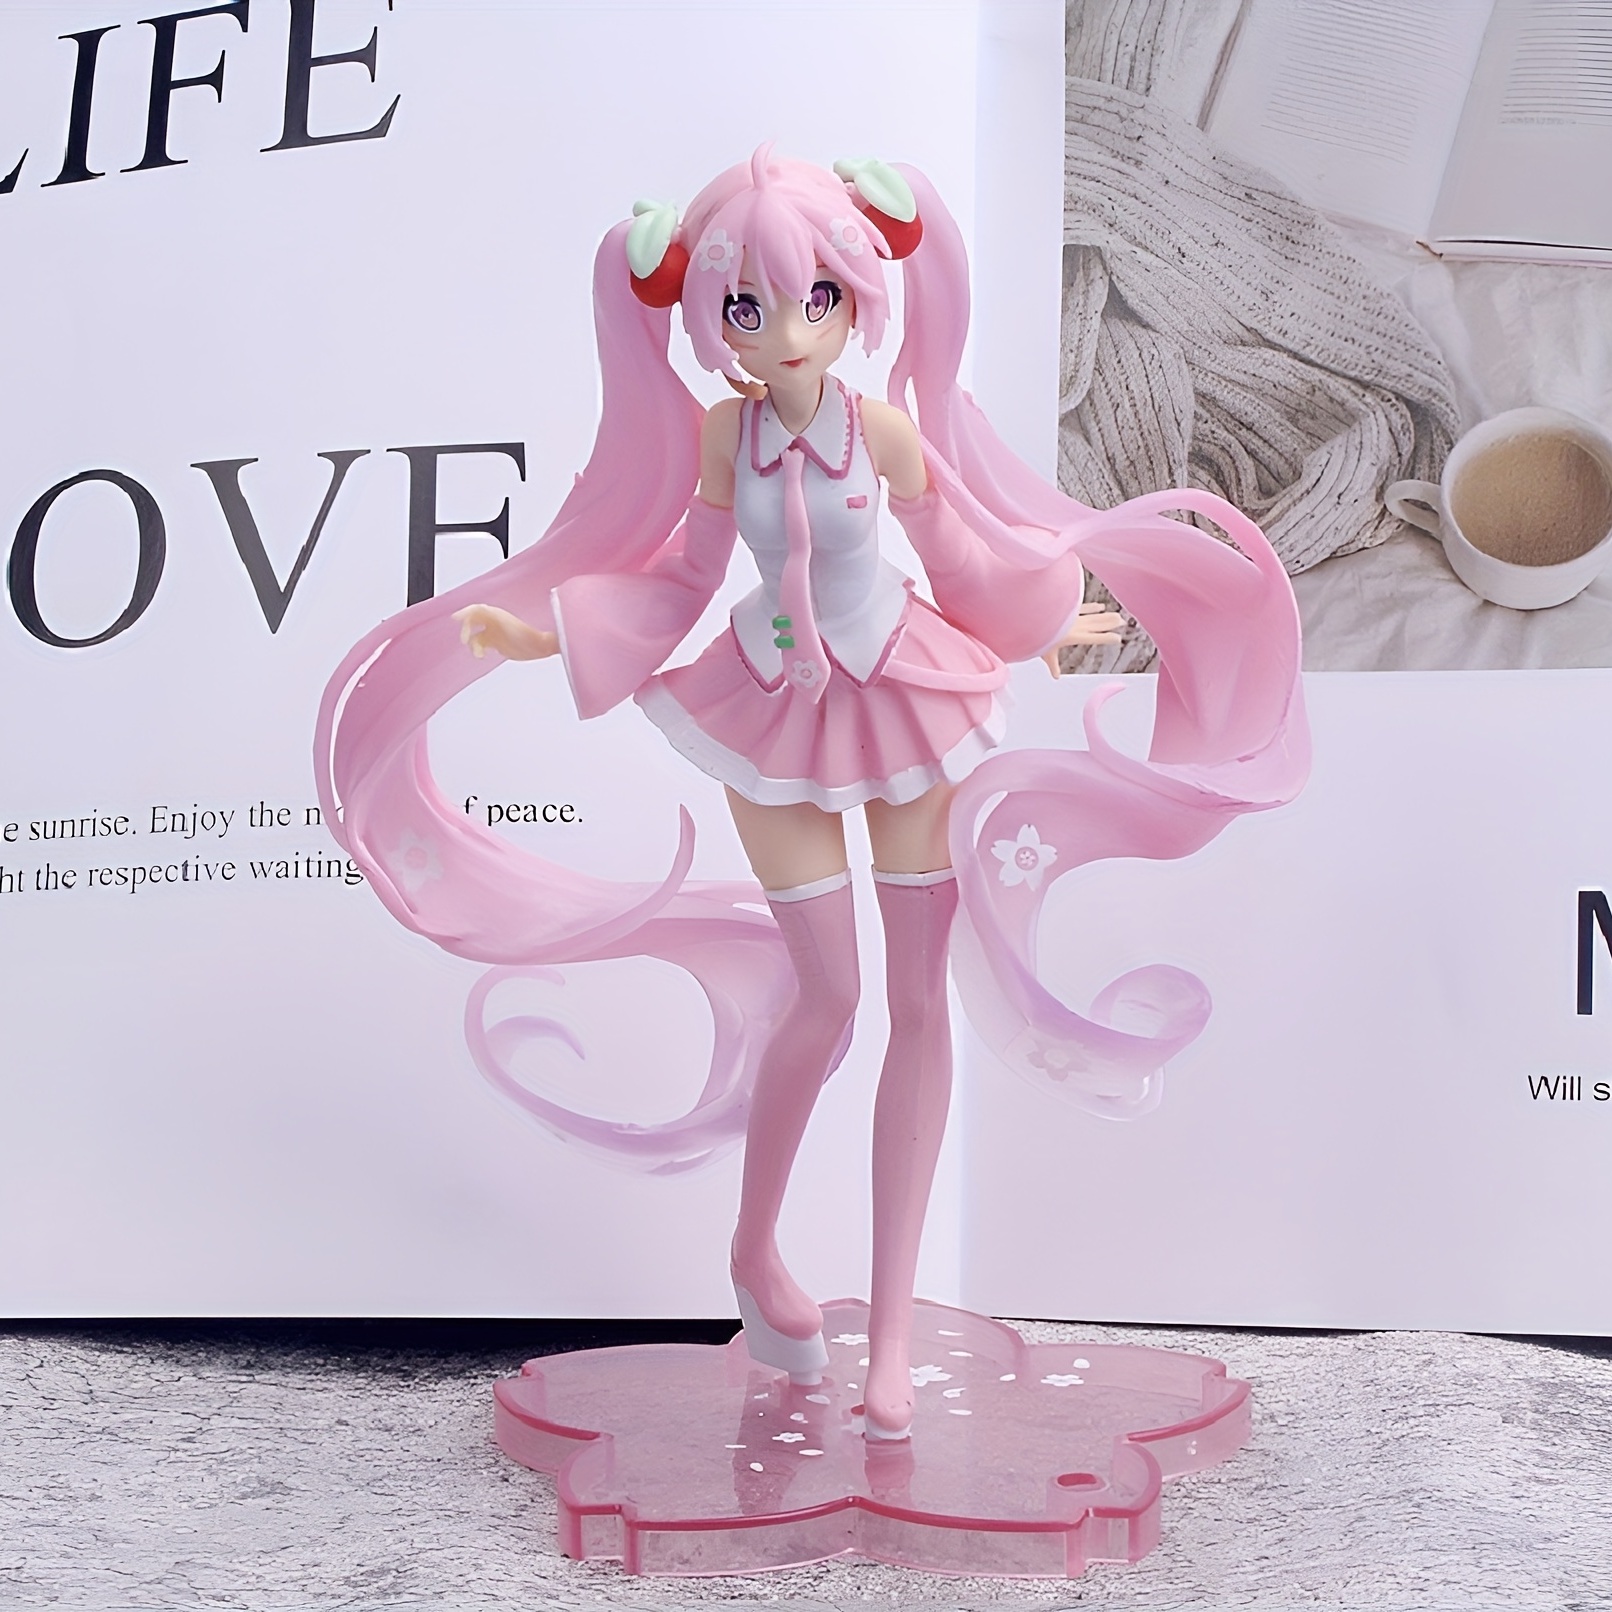 Anime Girls: 18 Cute Figures to Fawn Over Next Year (Part 1) - Buy  authentic Plus exclusive items from Japan | ZenPlus